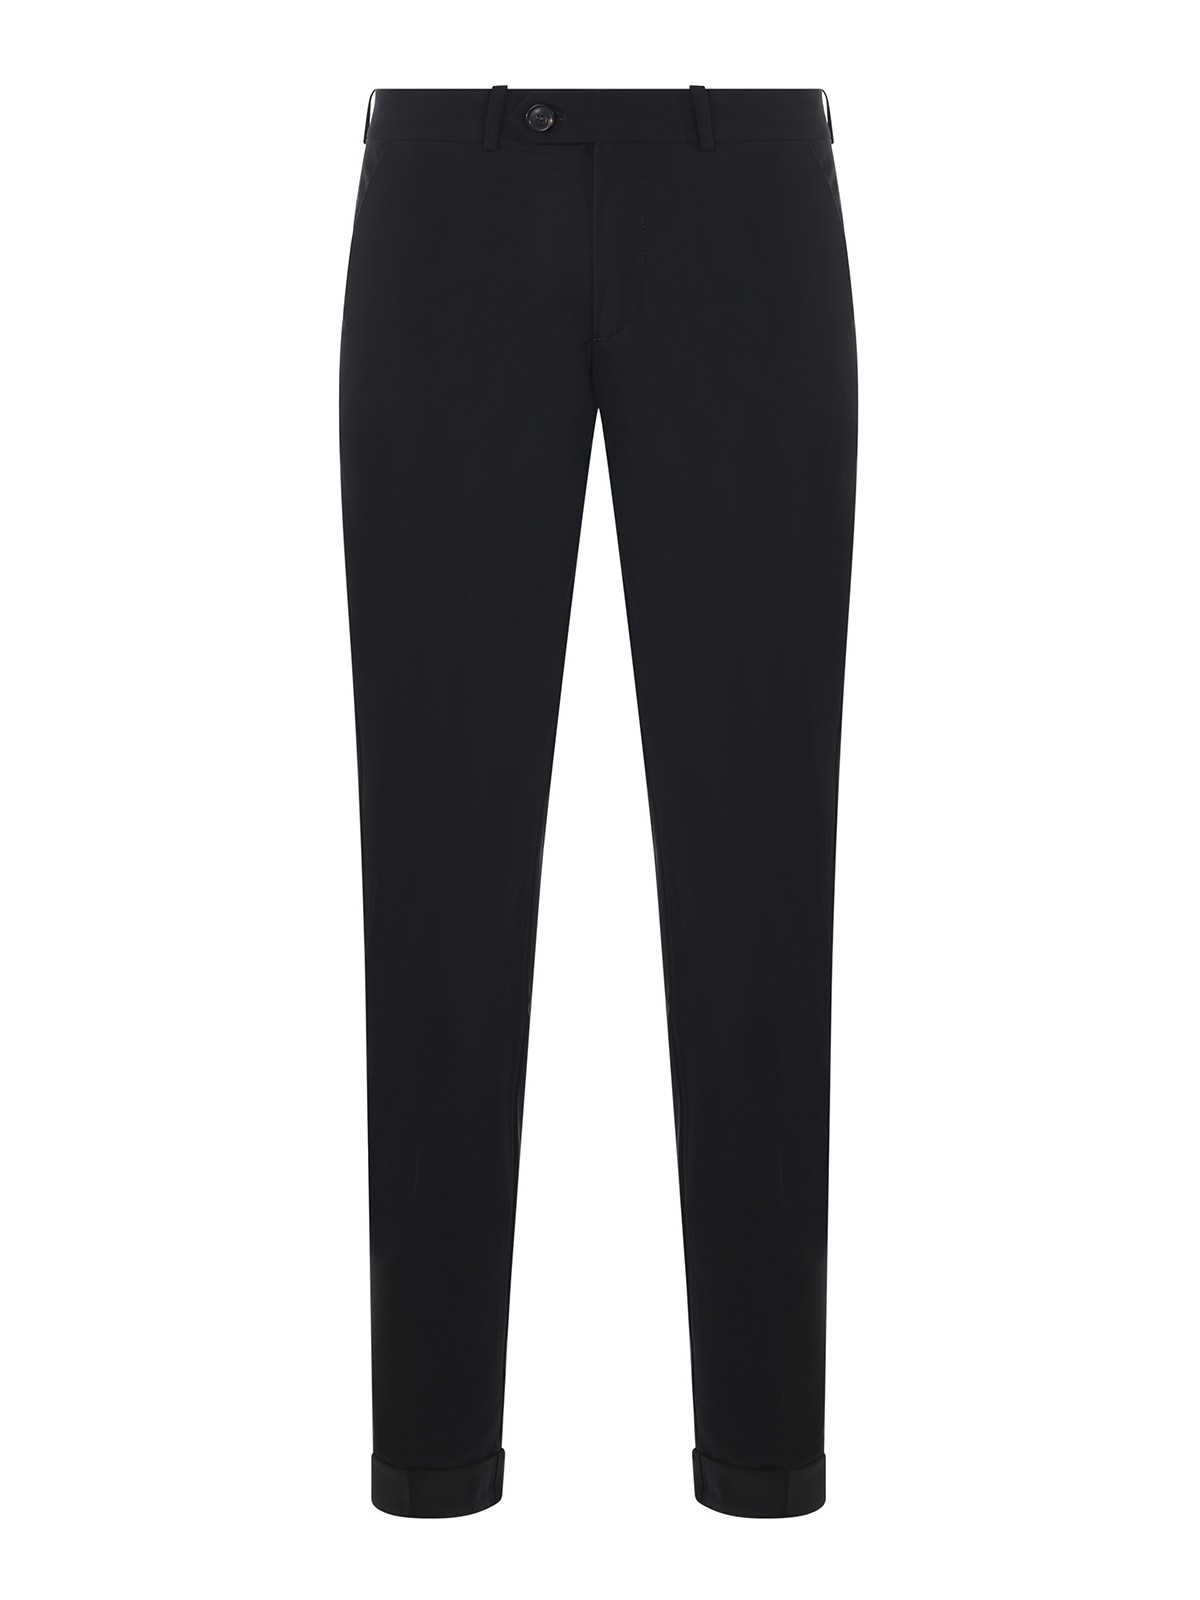 Rrd Roberto Ricci Designs Pleated Straight Leg Trousers With Turn-ups In Black